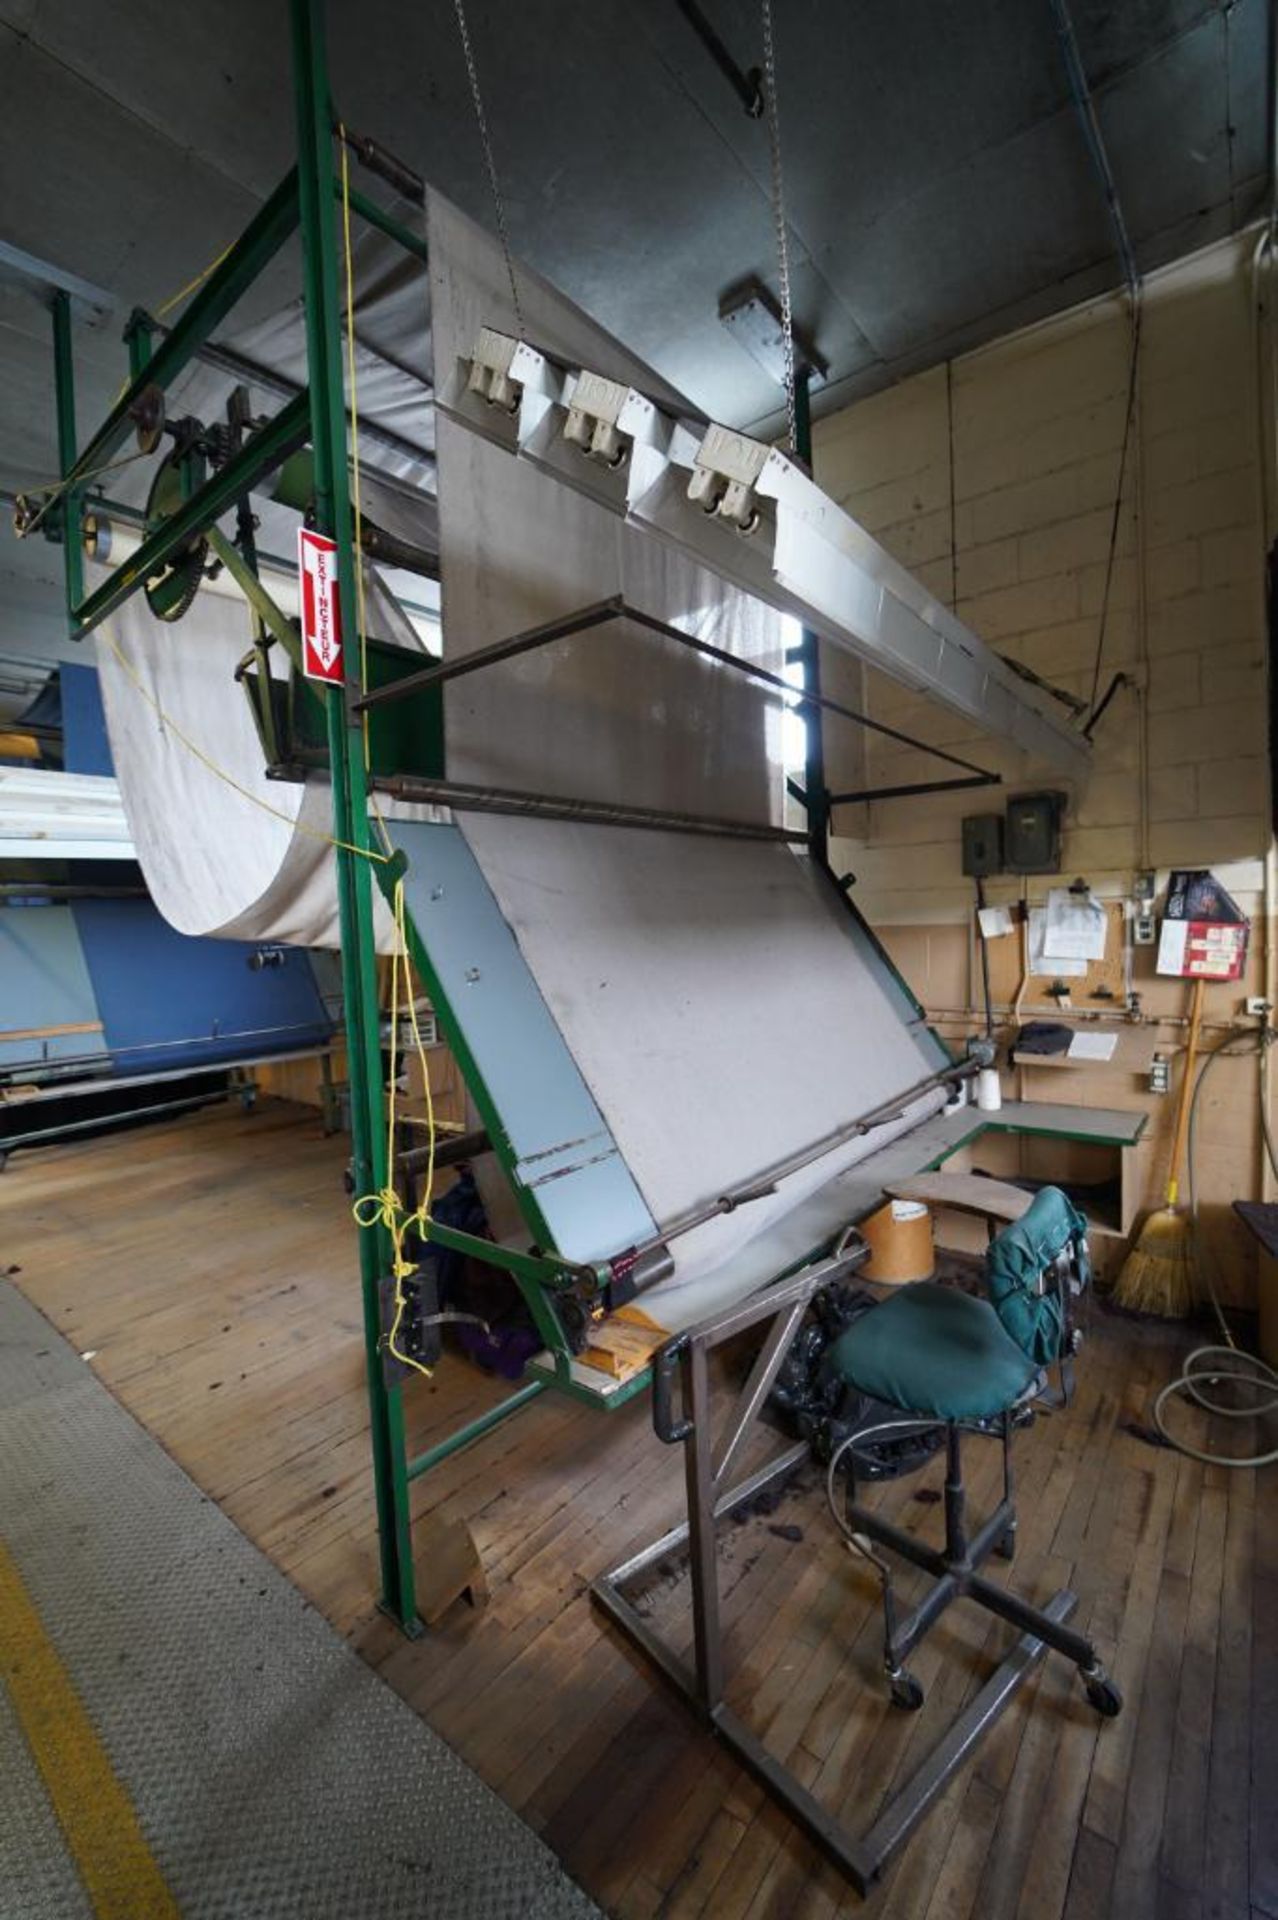 Woolen Fabric Mending Stations, Located At 250 Route de la Station, Saint-Victor, Quebec, Canada - Image 16 of 16